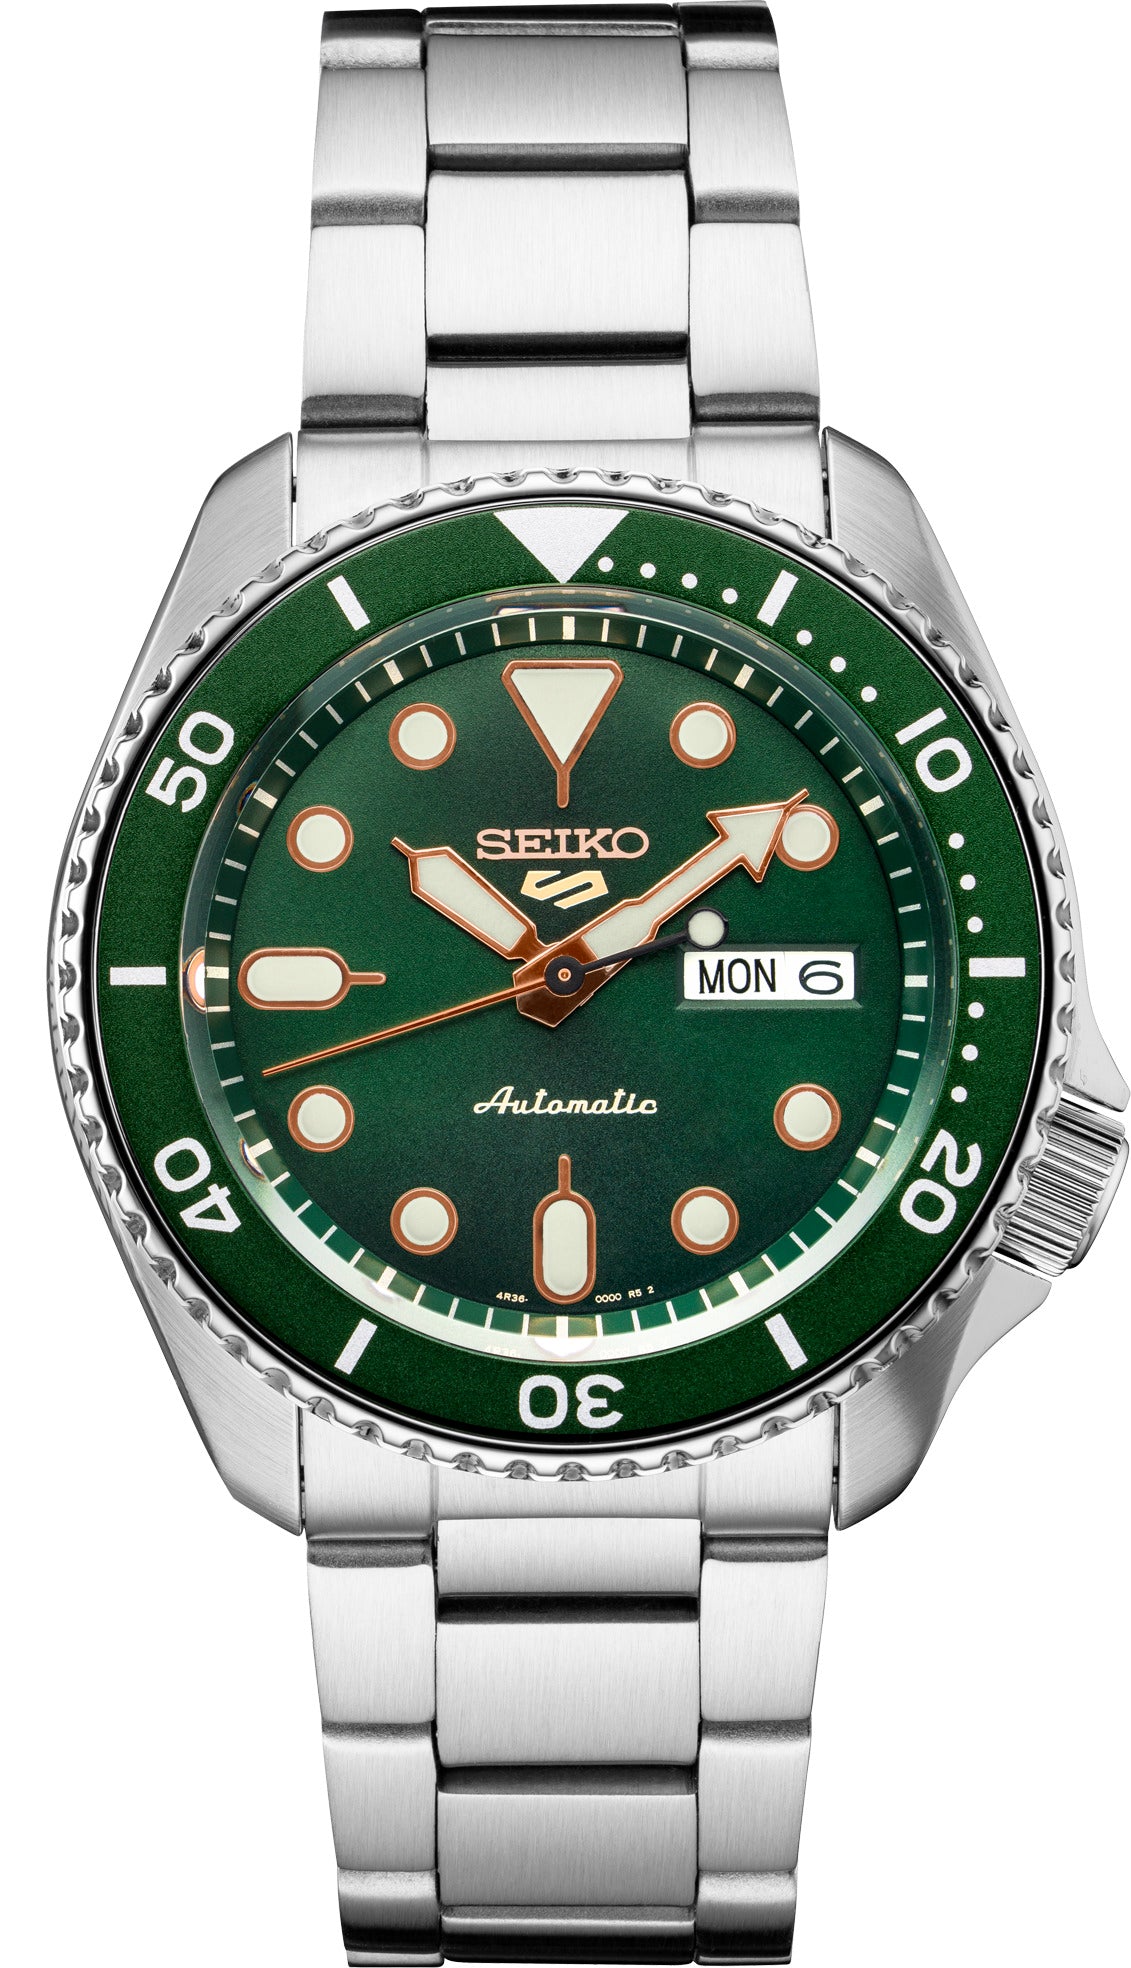 Seiko 5 Sports Men's Stainless Watch in color Silver-Tone, green from the front view